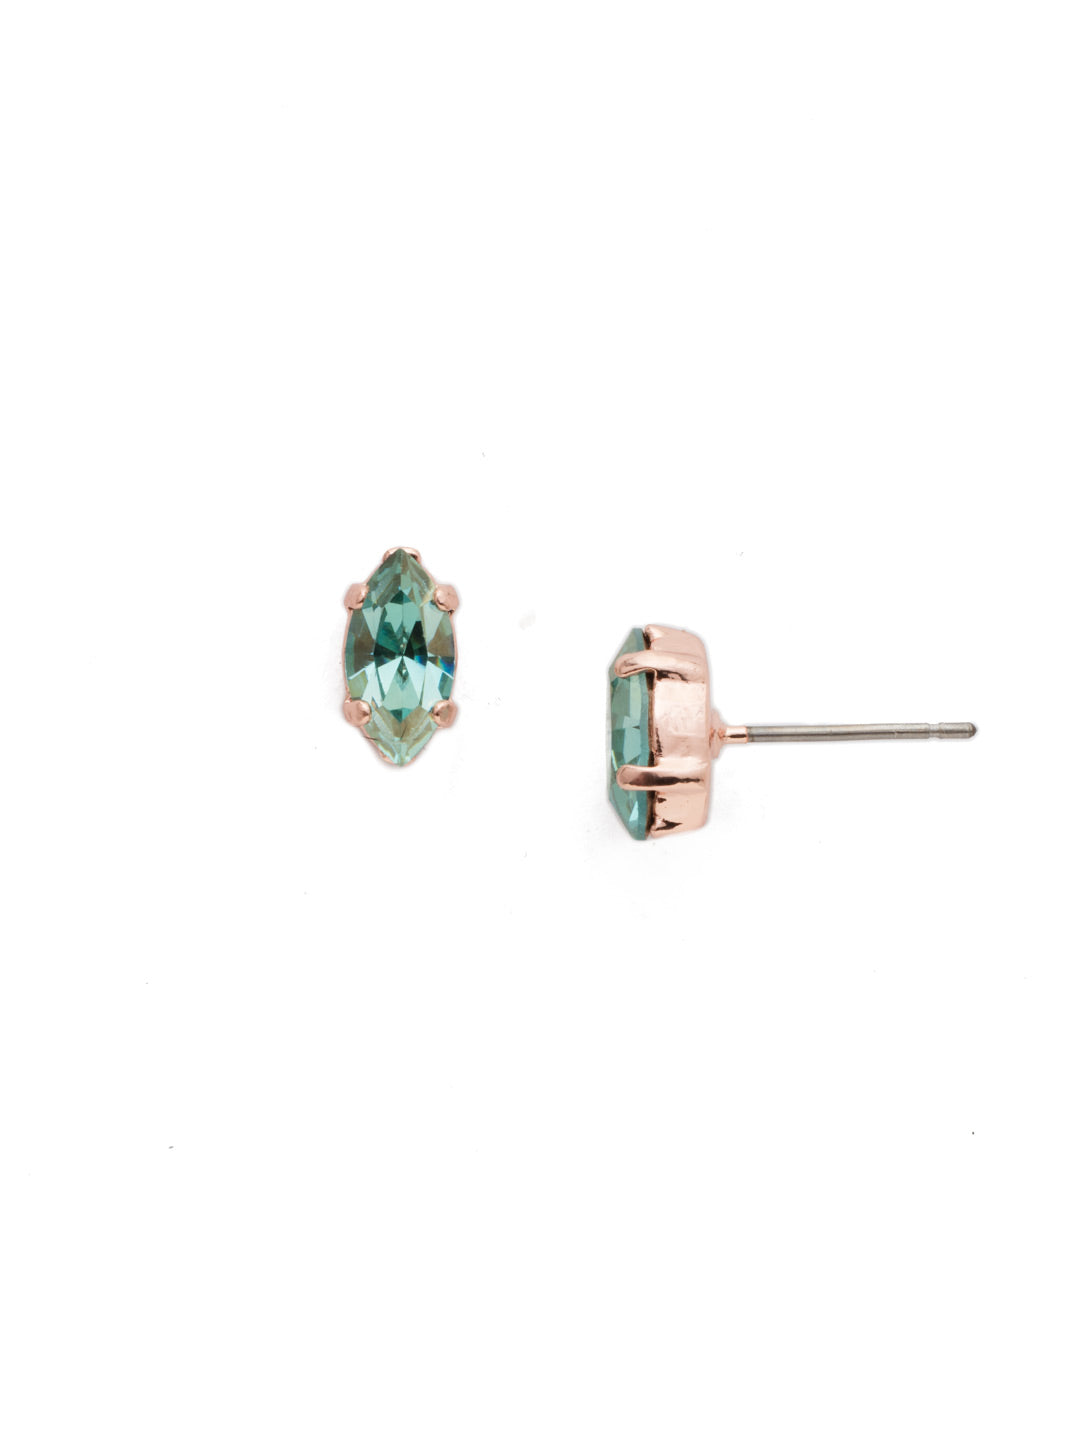 Clarissa Stud Earrings - EEP4RGCAZ - The Clarissa Stud Earring is for the lover of classics with a twist. Simple sparkling crystals get an oomph from the navette shape. From Sorrelli's Crystal Azure collection in our Rose Gold-tone finish.